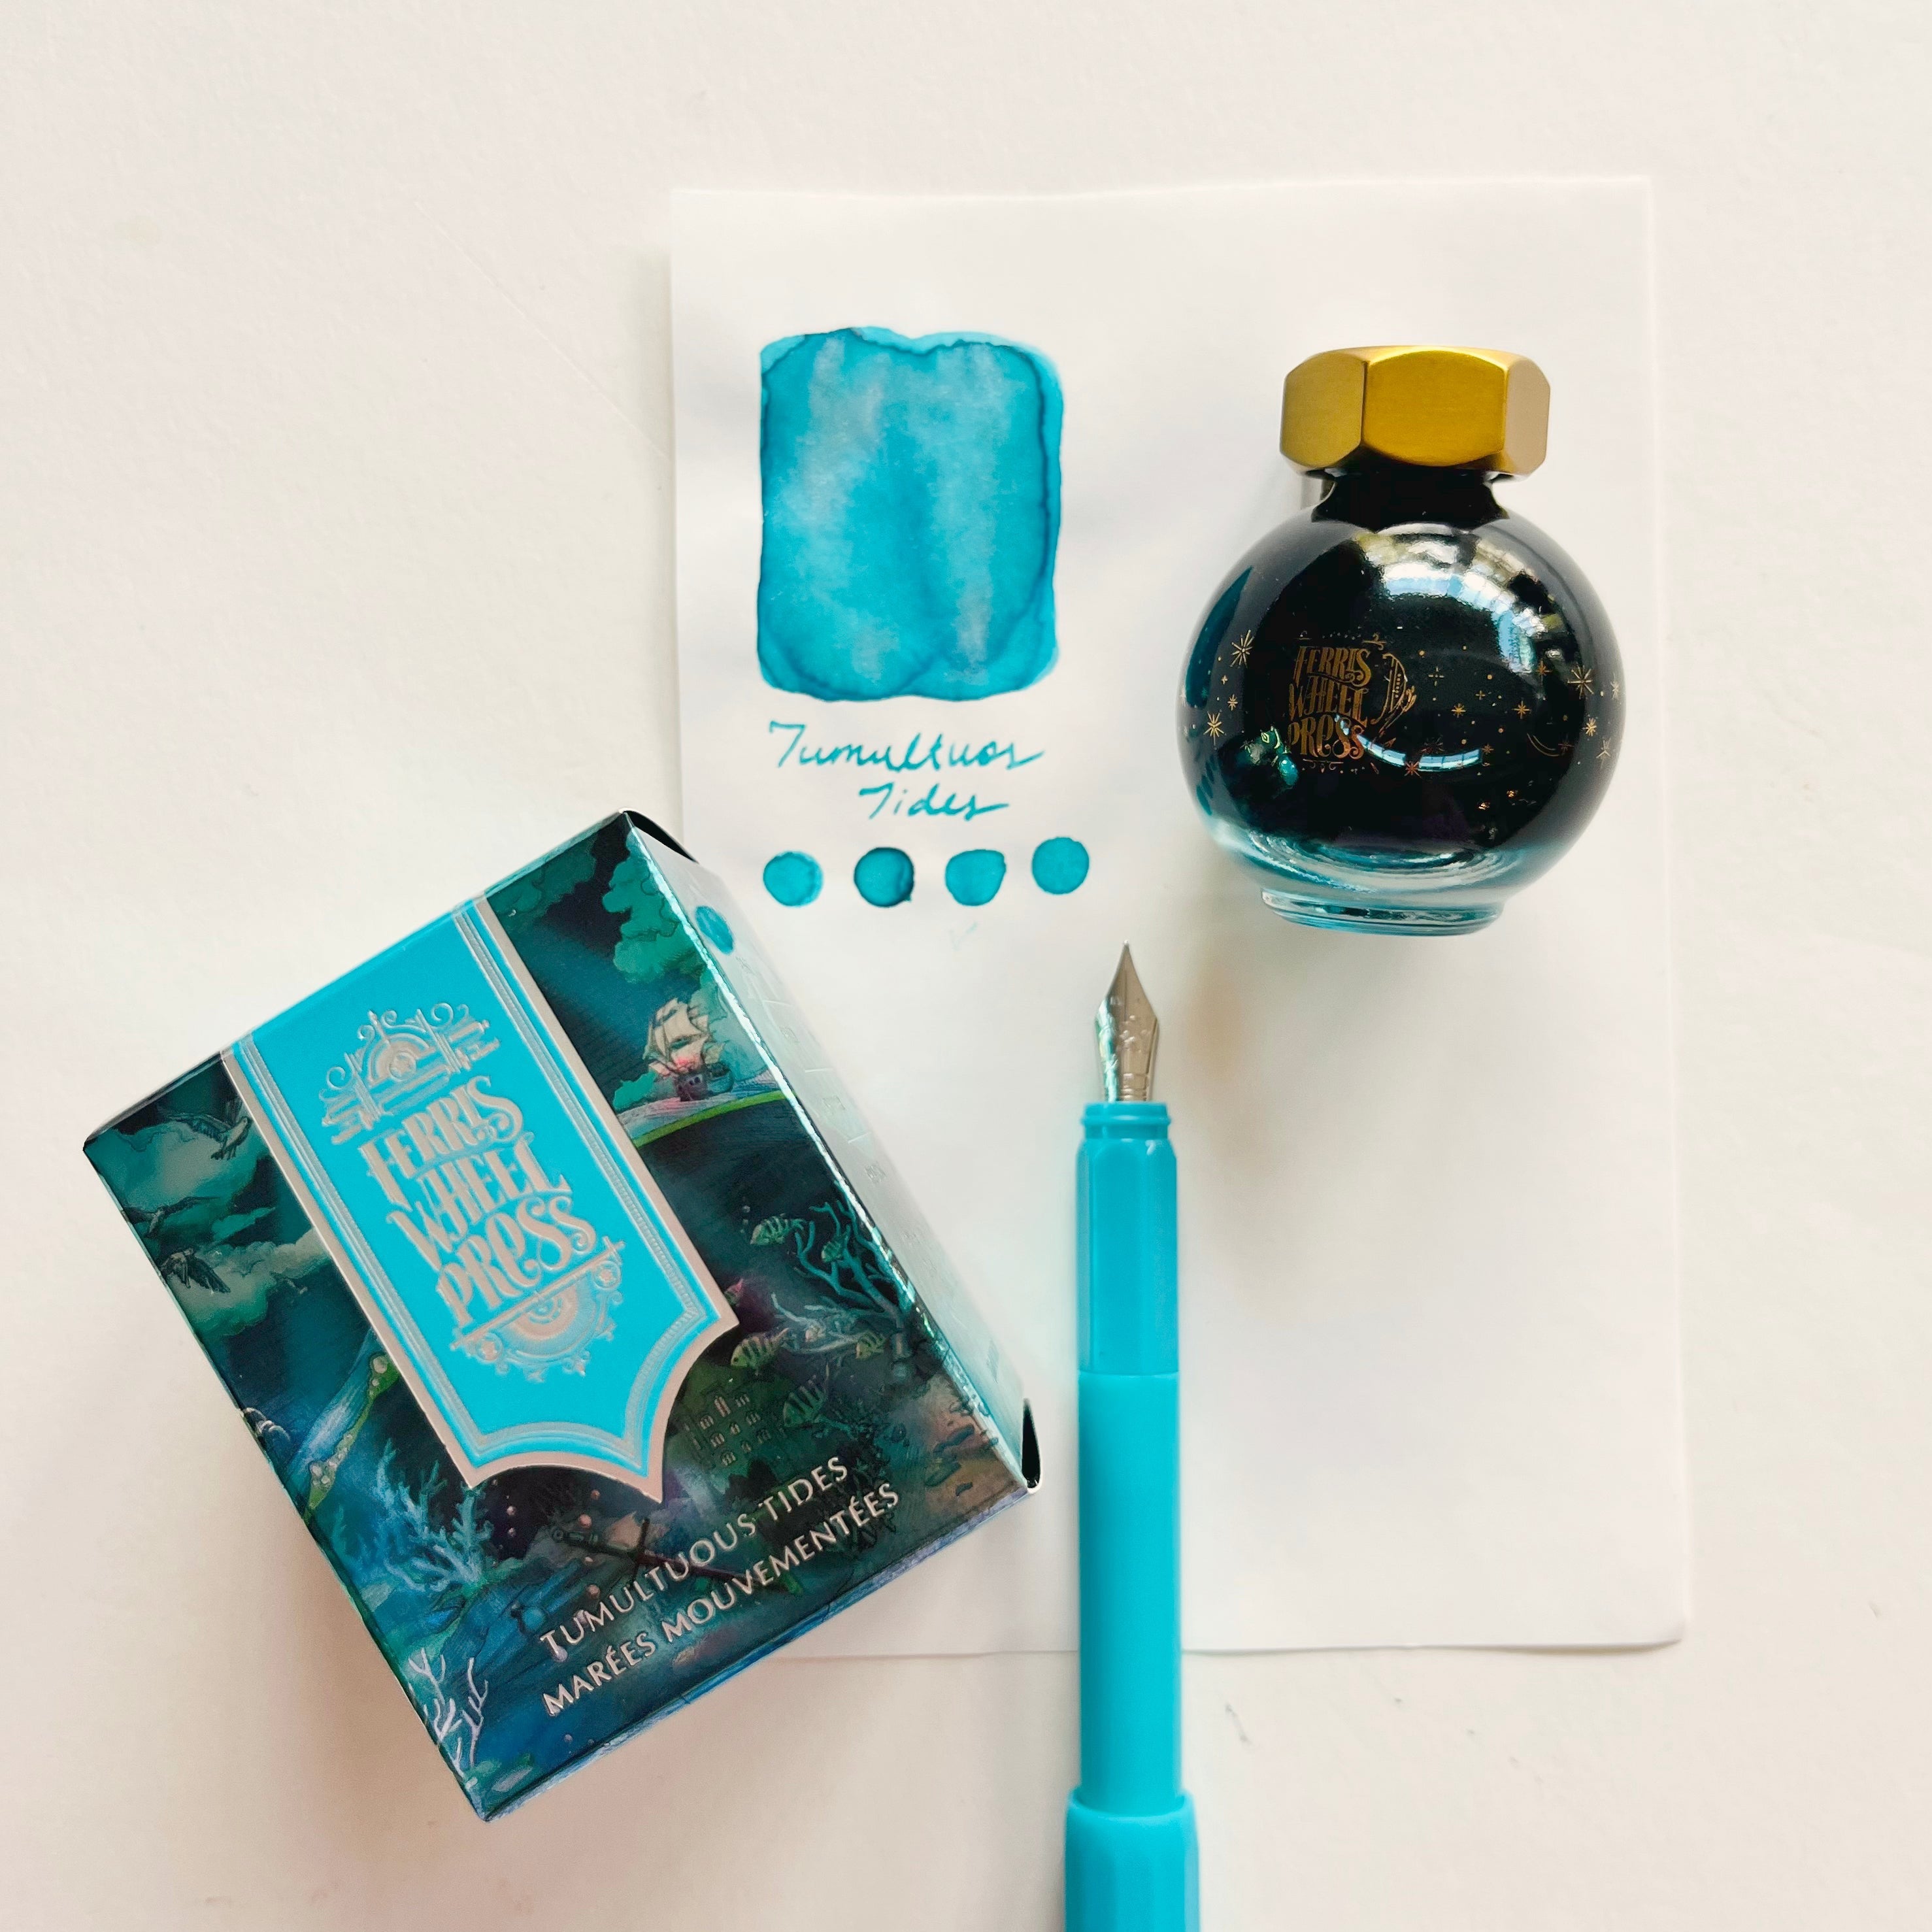 Ferris Wheel Press Tumultuous Tides (20ml) Bottled Ink - Once Upon A Time